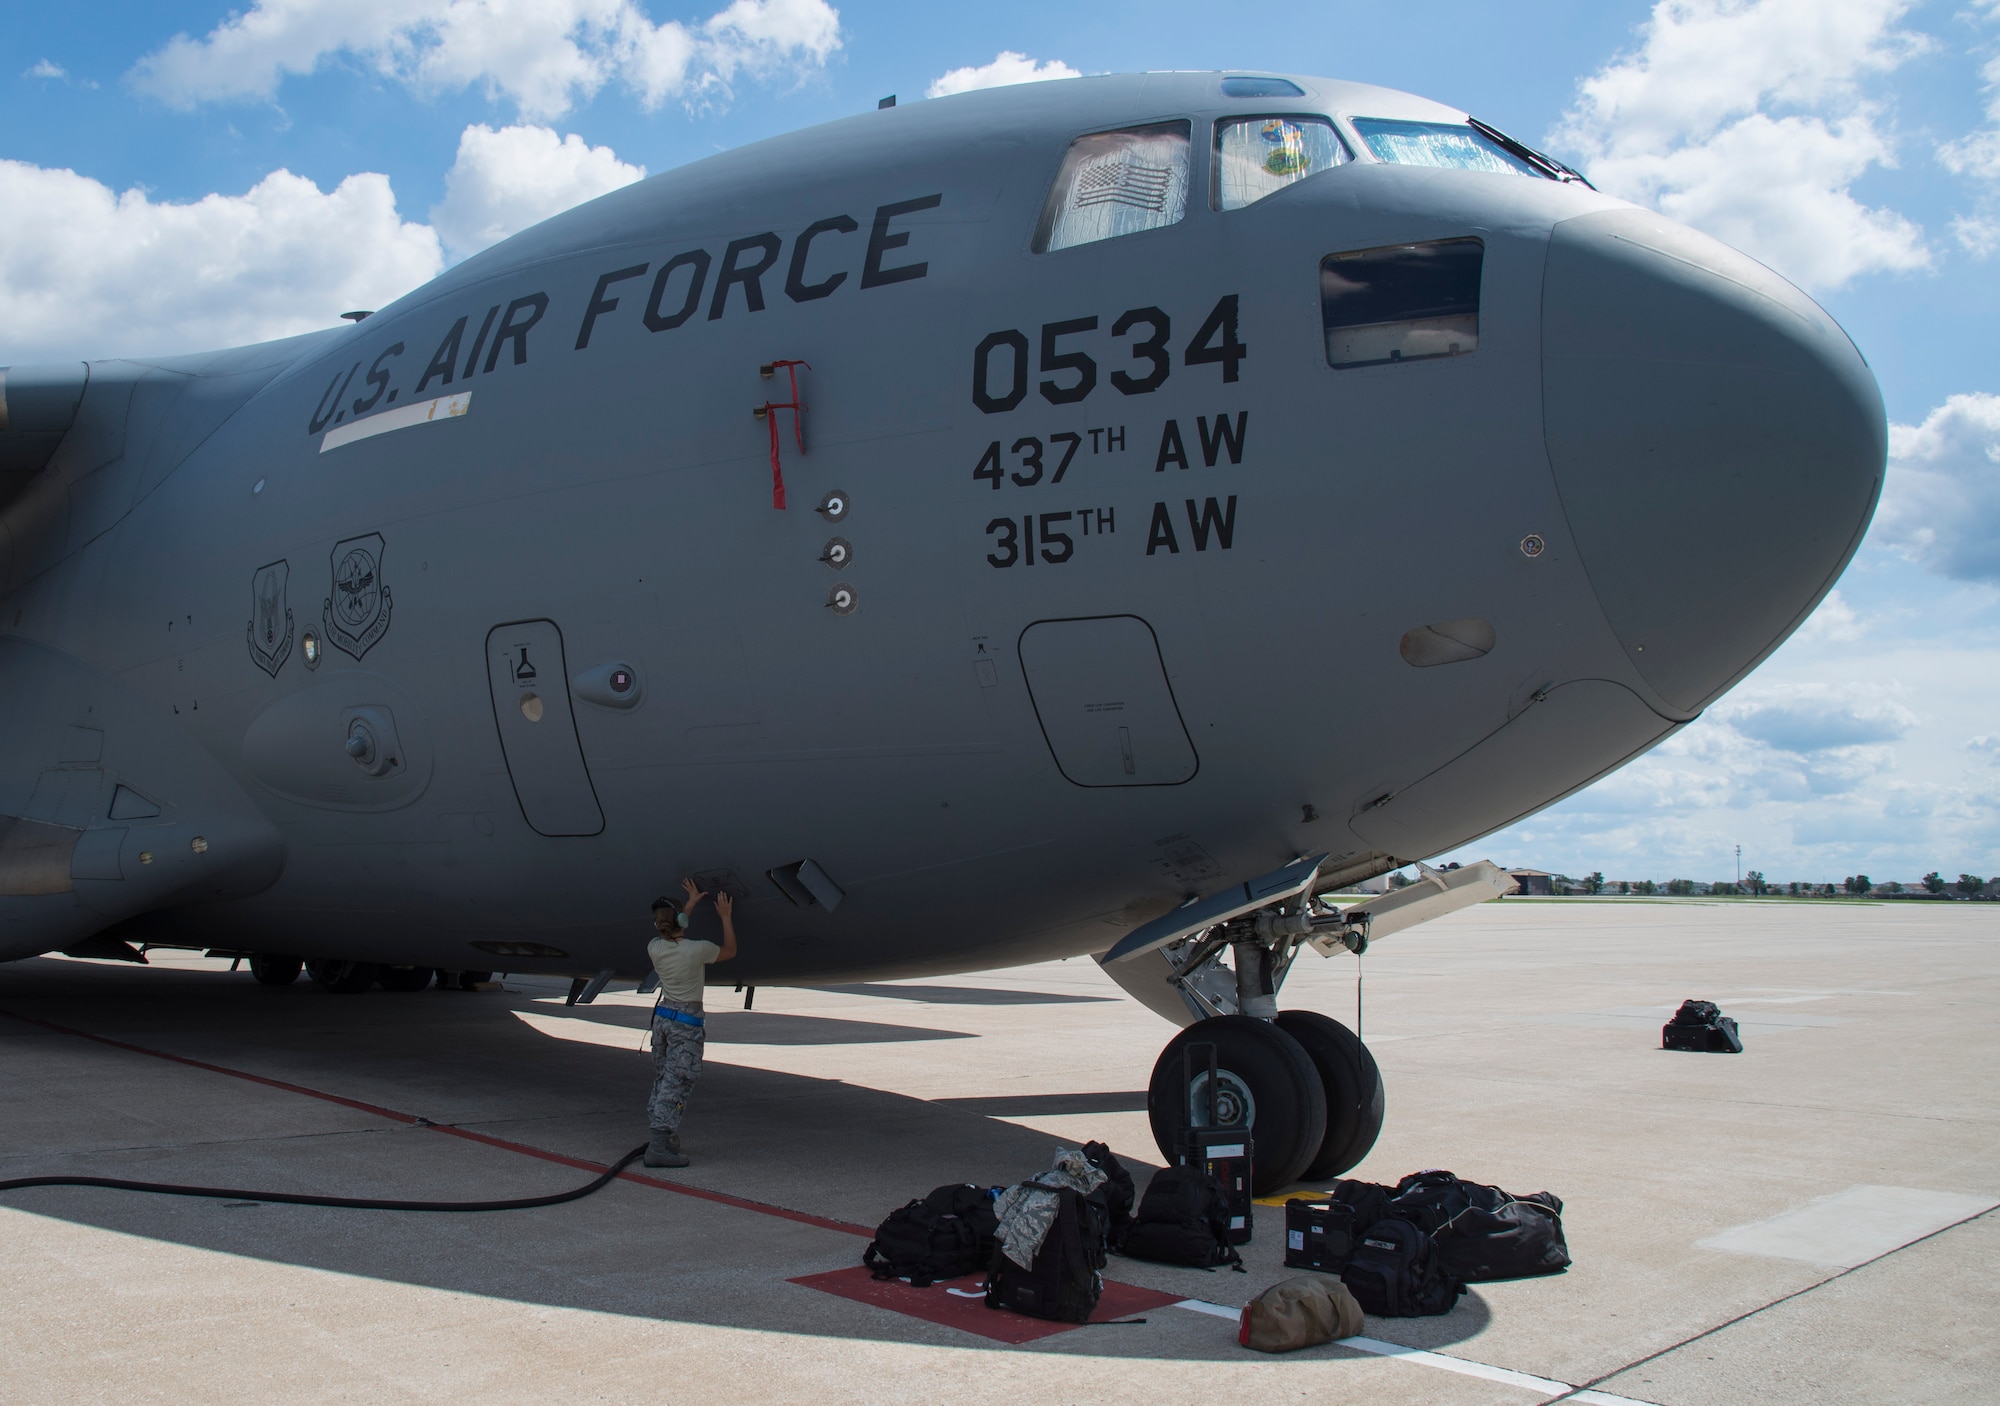 Scott Air Force Base and Mid-America Airport hosted multiple C-17 Globemaster III aircraft that evacuated Joint Base Charleston, South Carolina in preparation for Hurricane Florence, Sept. 11, 2018. More than 1 million people were ordered to evacuate Virginia, North Carolina and South Carolina as the East Coast braces itself for the Category 4 storm. (U.S. Air Force photo by Airman 1st Class Nathaniel Hudson)